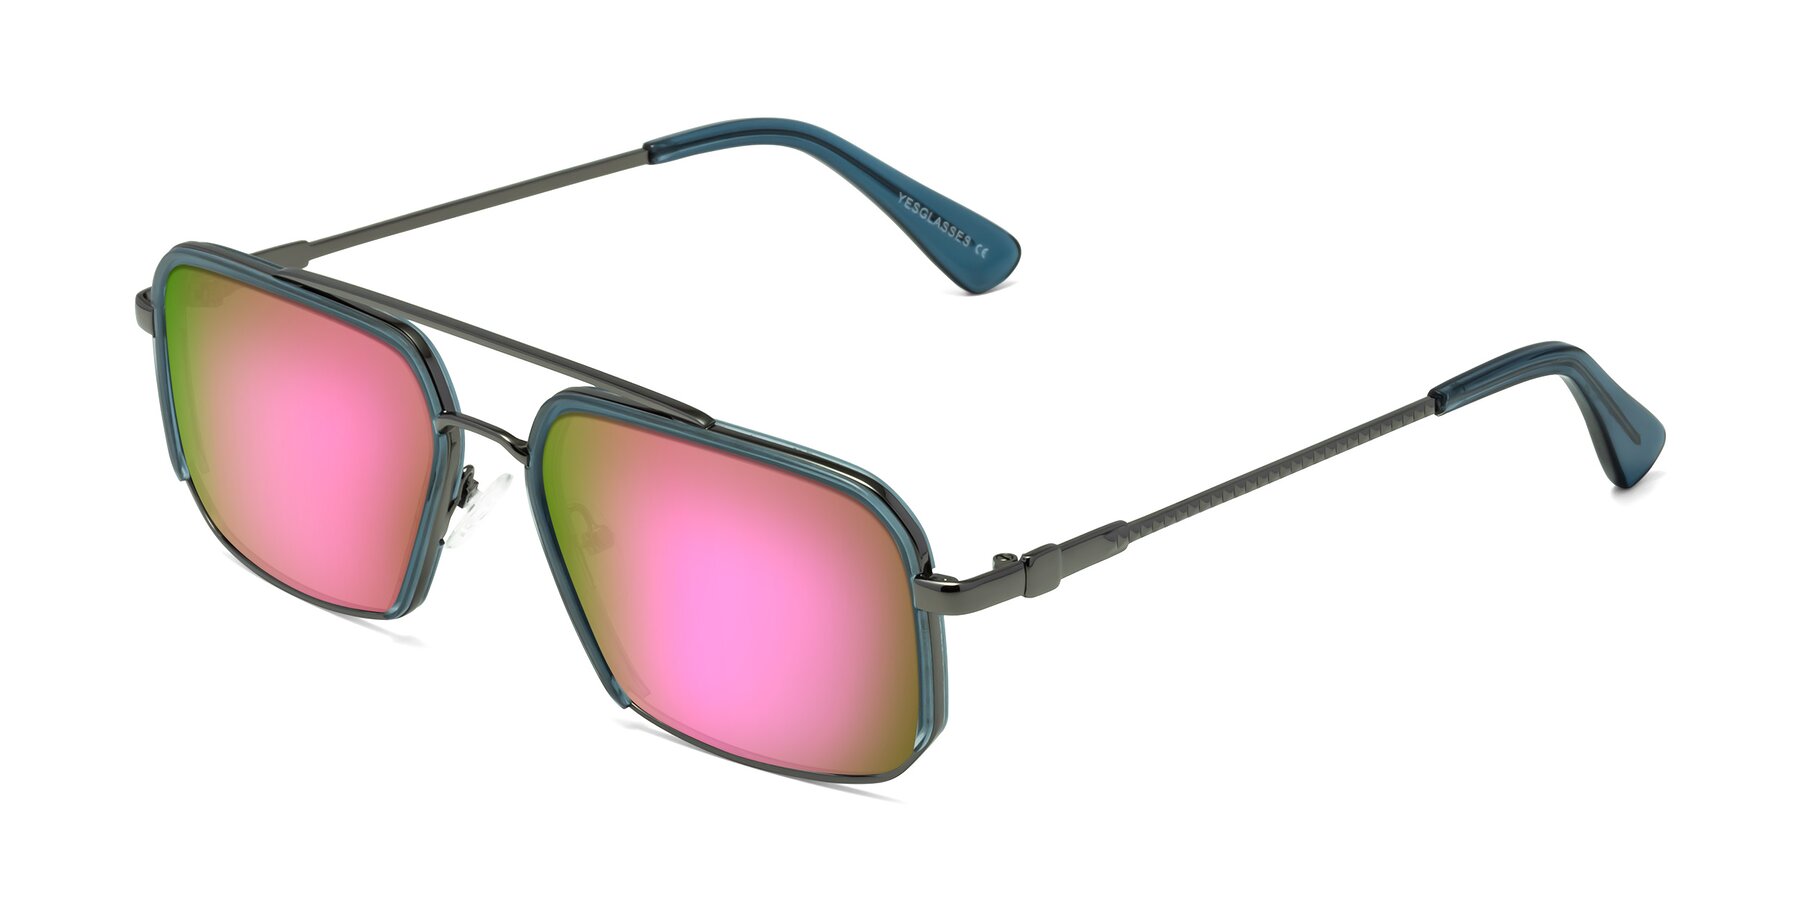 Angle of Dechter in Teal-Gunmetal with Pink Mirrored Lenses